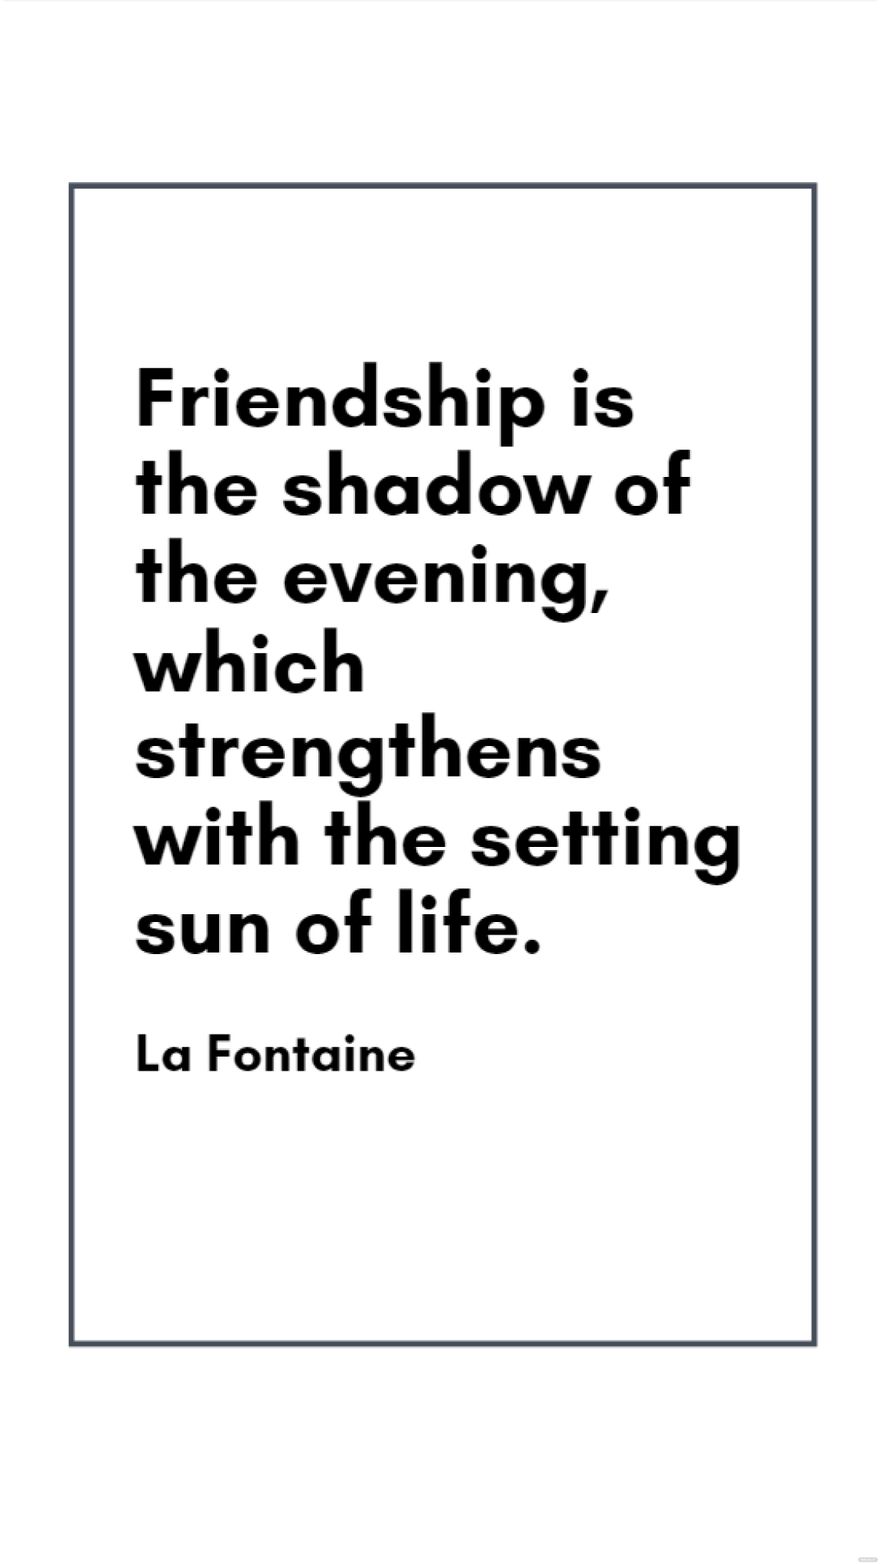 La Fontaine - Friendship is the shadow of the evening, which strengthens with the setting sun of life.